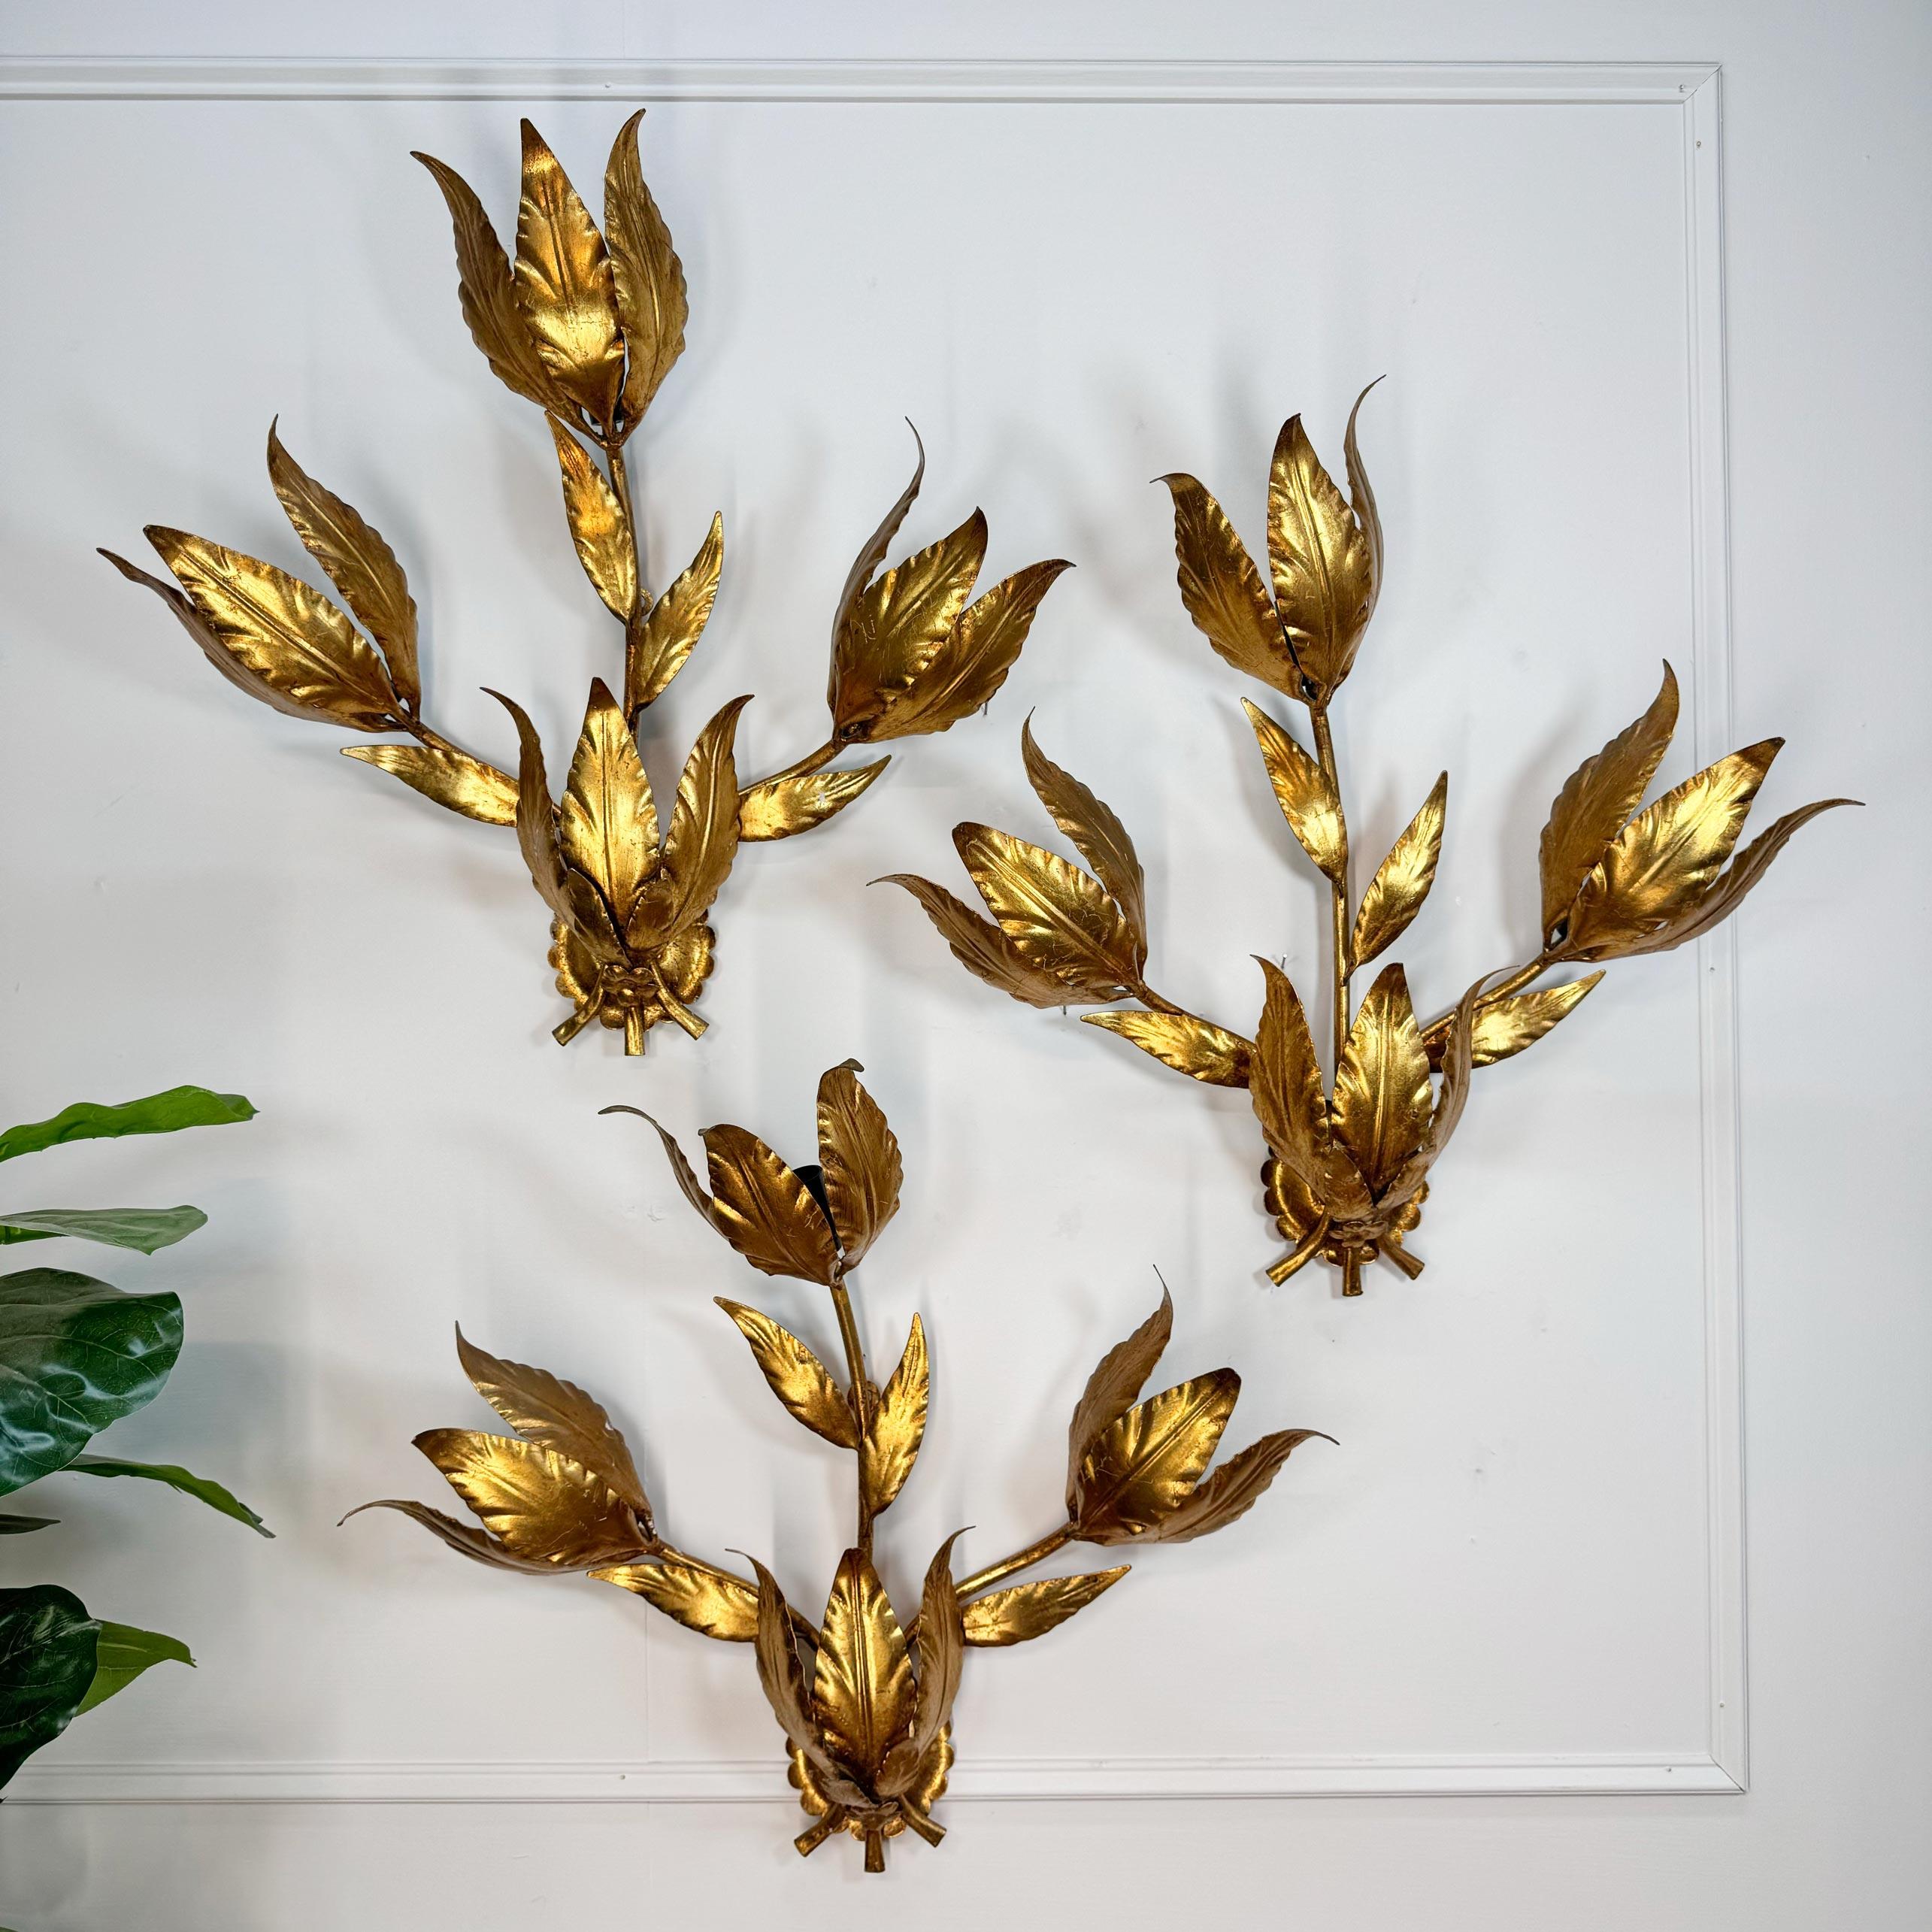 A superb set of 3 Hans Kogl wall lights from the 1970's, formed as branches and leaves and decorated with gold leaf gilt finish.



Each wall light houses 3 e14 (small screw in) lamp holders.



Fully Rewired and PAT tested.



Price is for the set